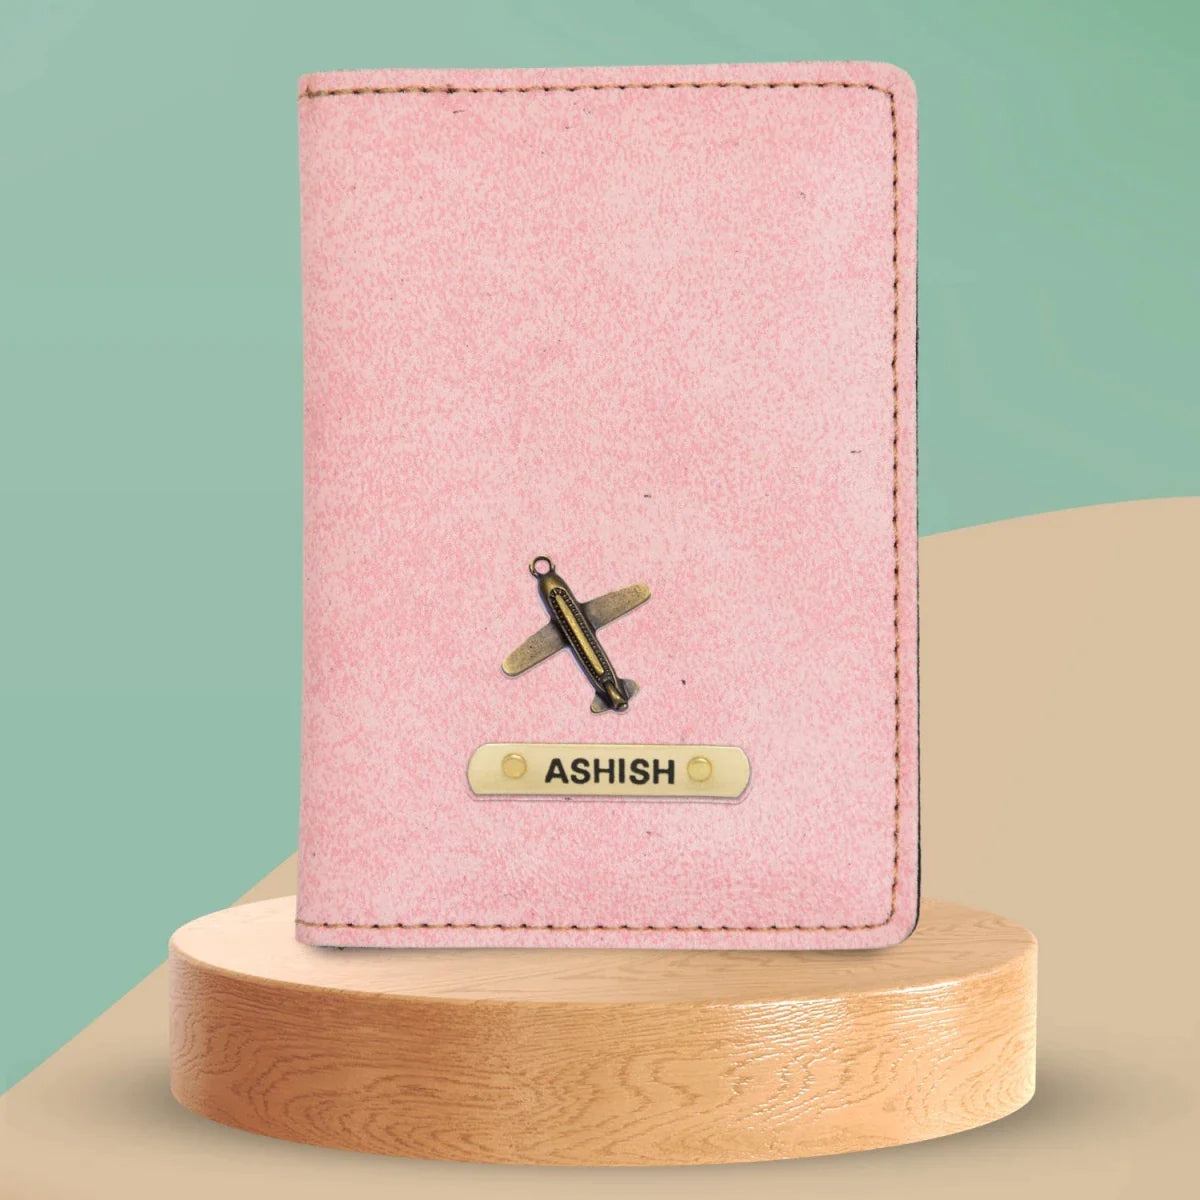 Travel in utmost luxury with a classy leather passport case that is customized to suit your discerning style.